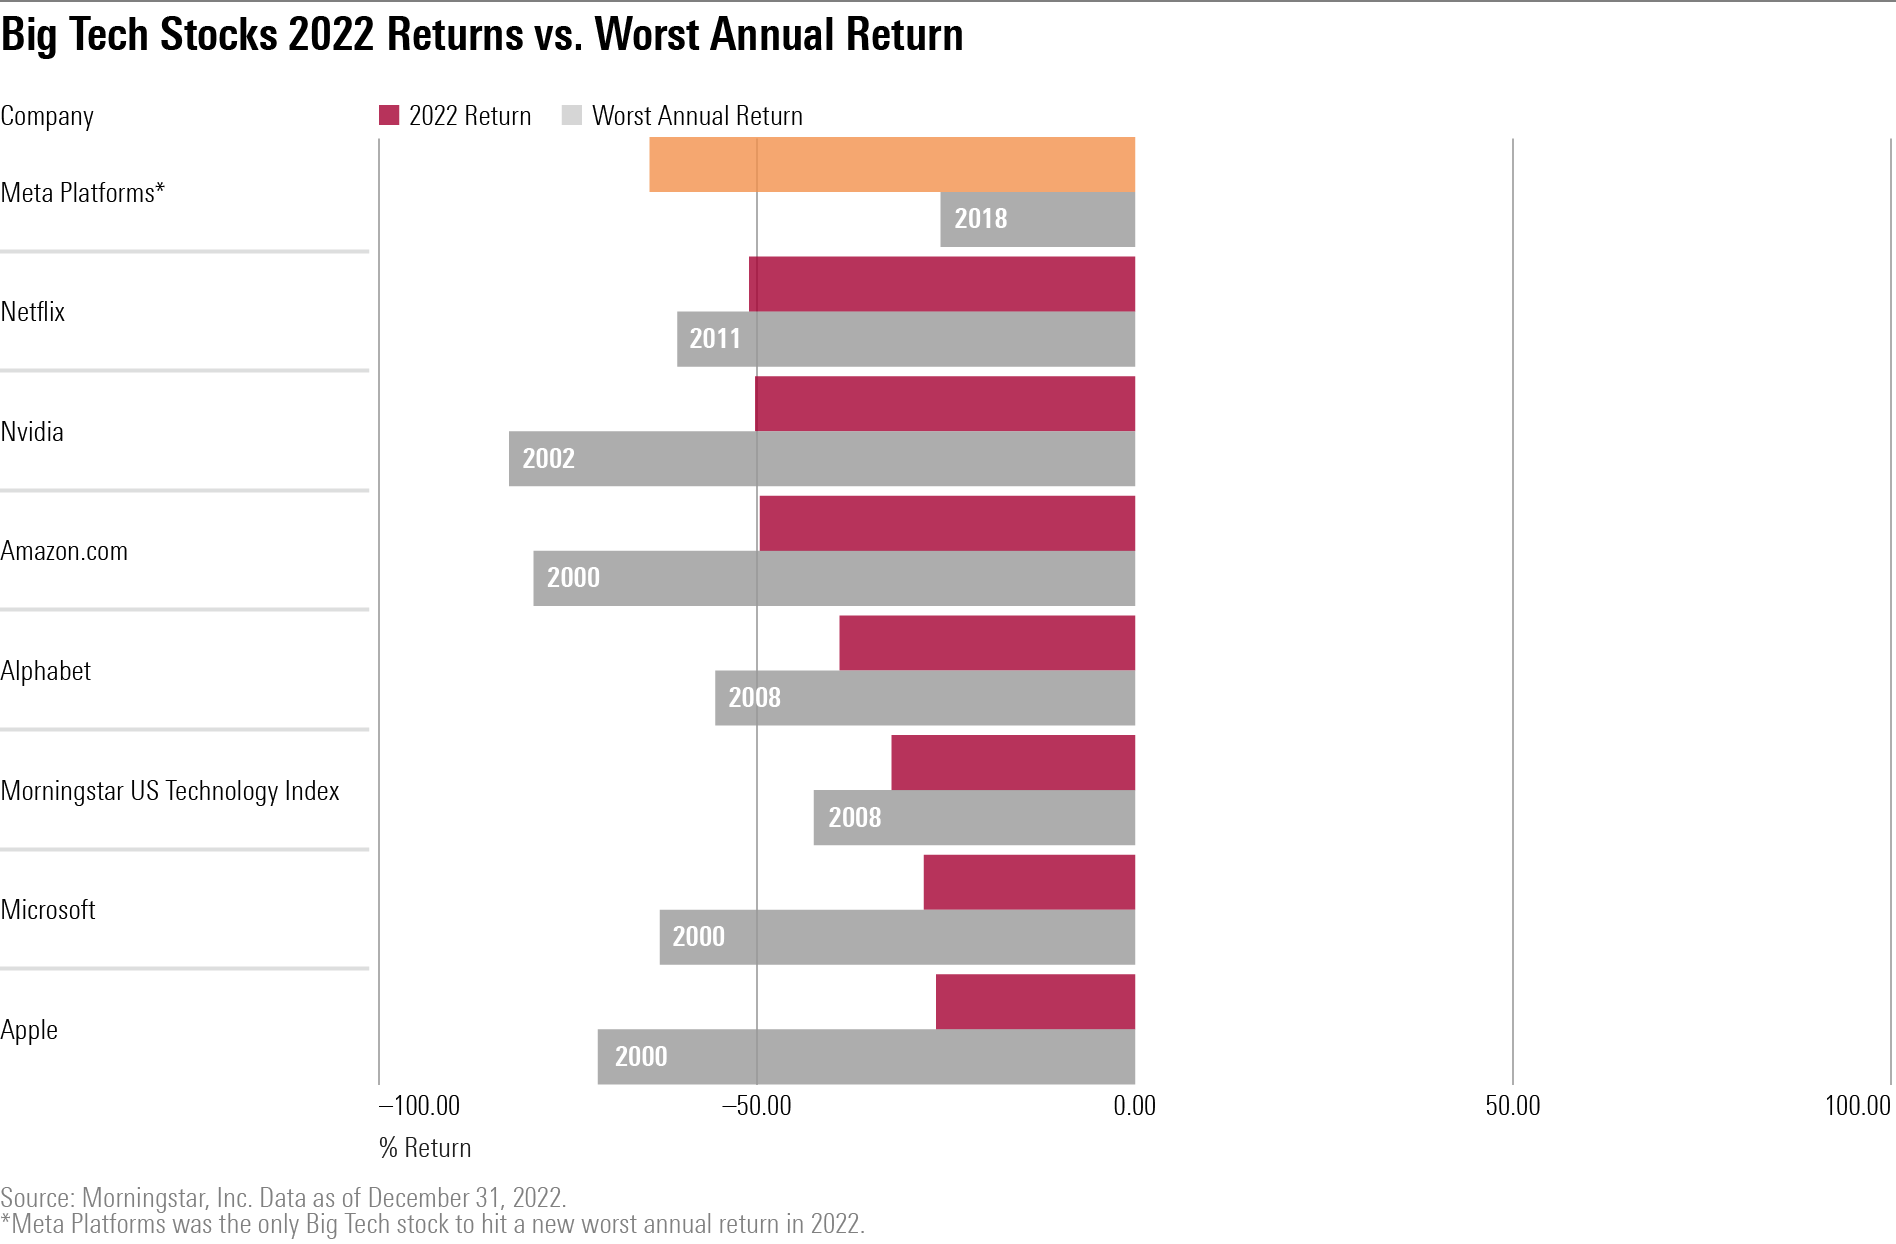 A chart showing Big Tech stock's 2022 returns and their worst annual returns.